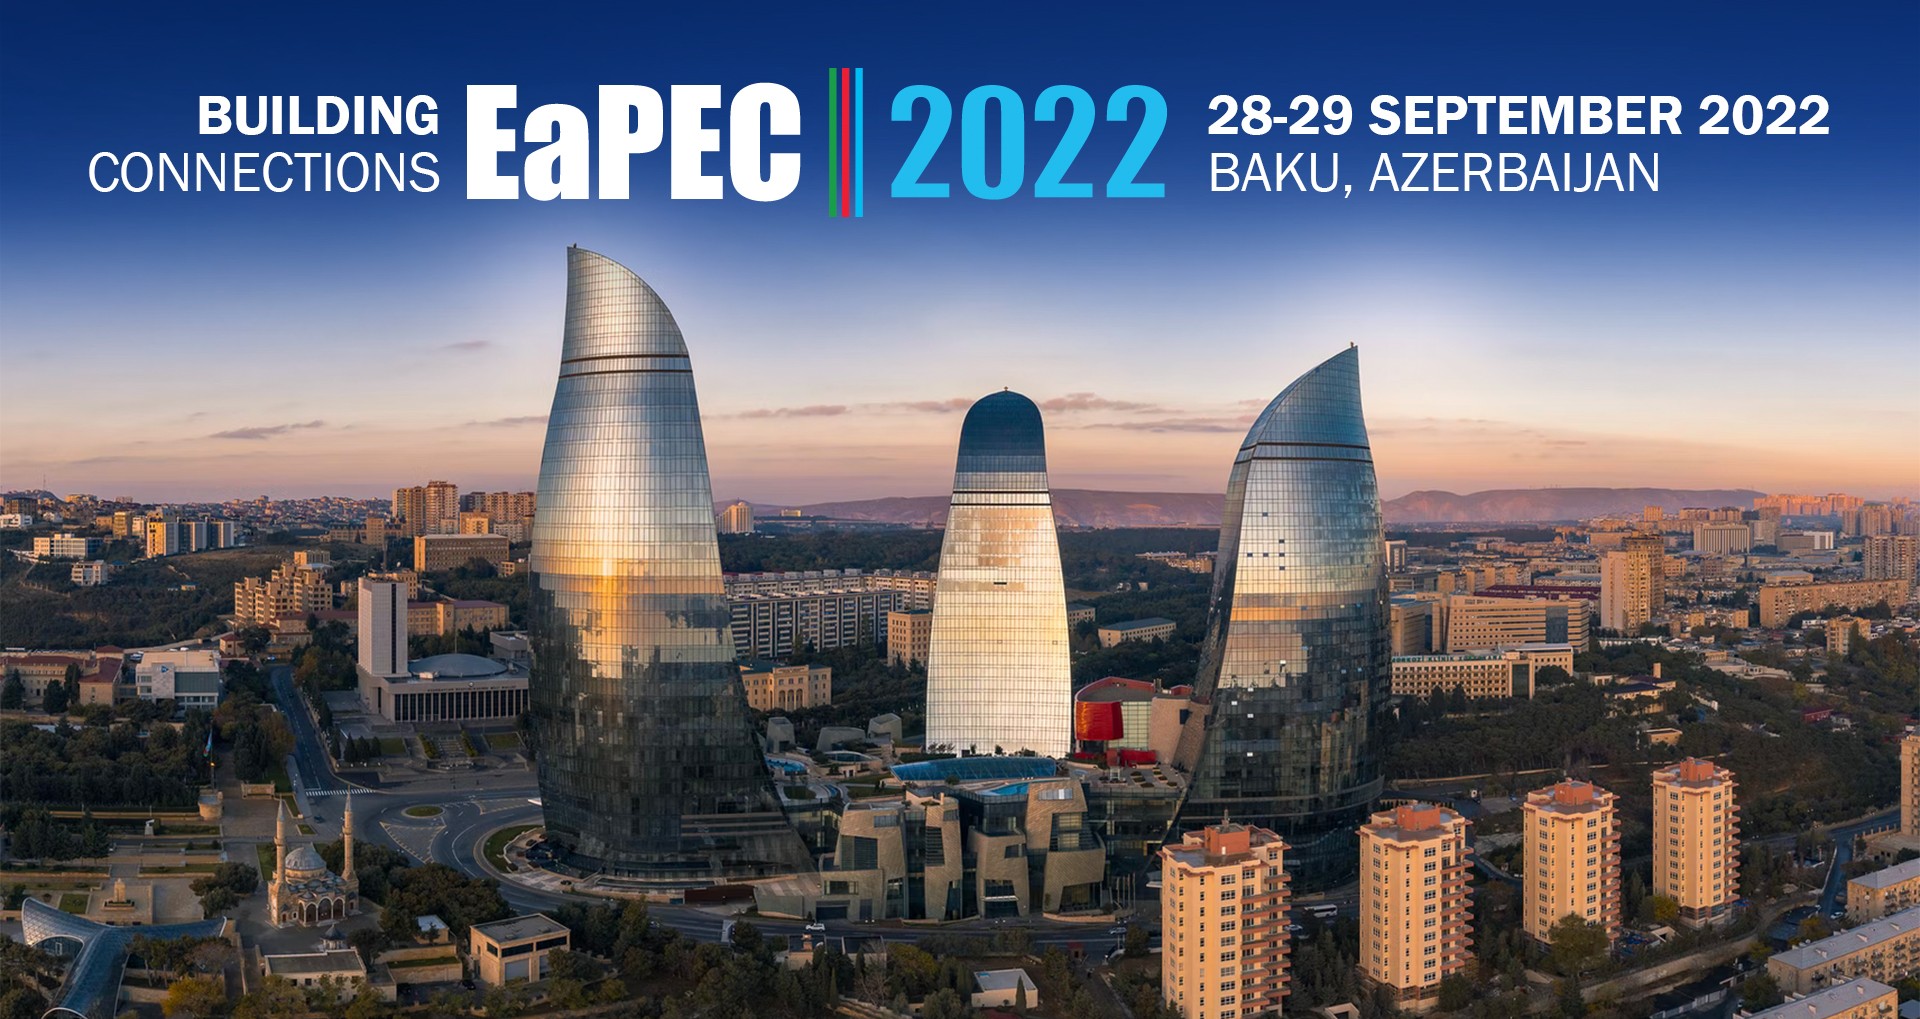 Photo with text overlay: view across Baku, Azerbaijan, with EaPEC 2022 conference logo and dates